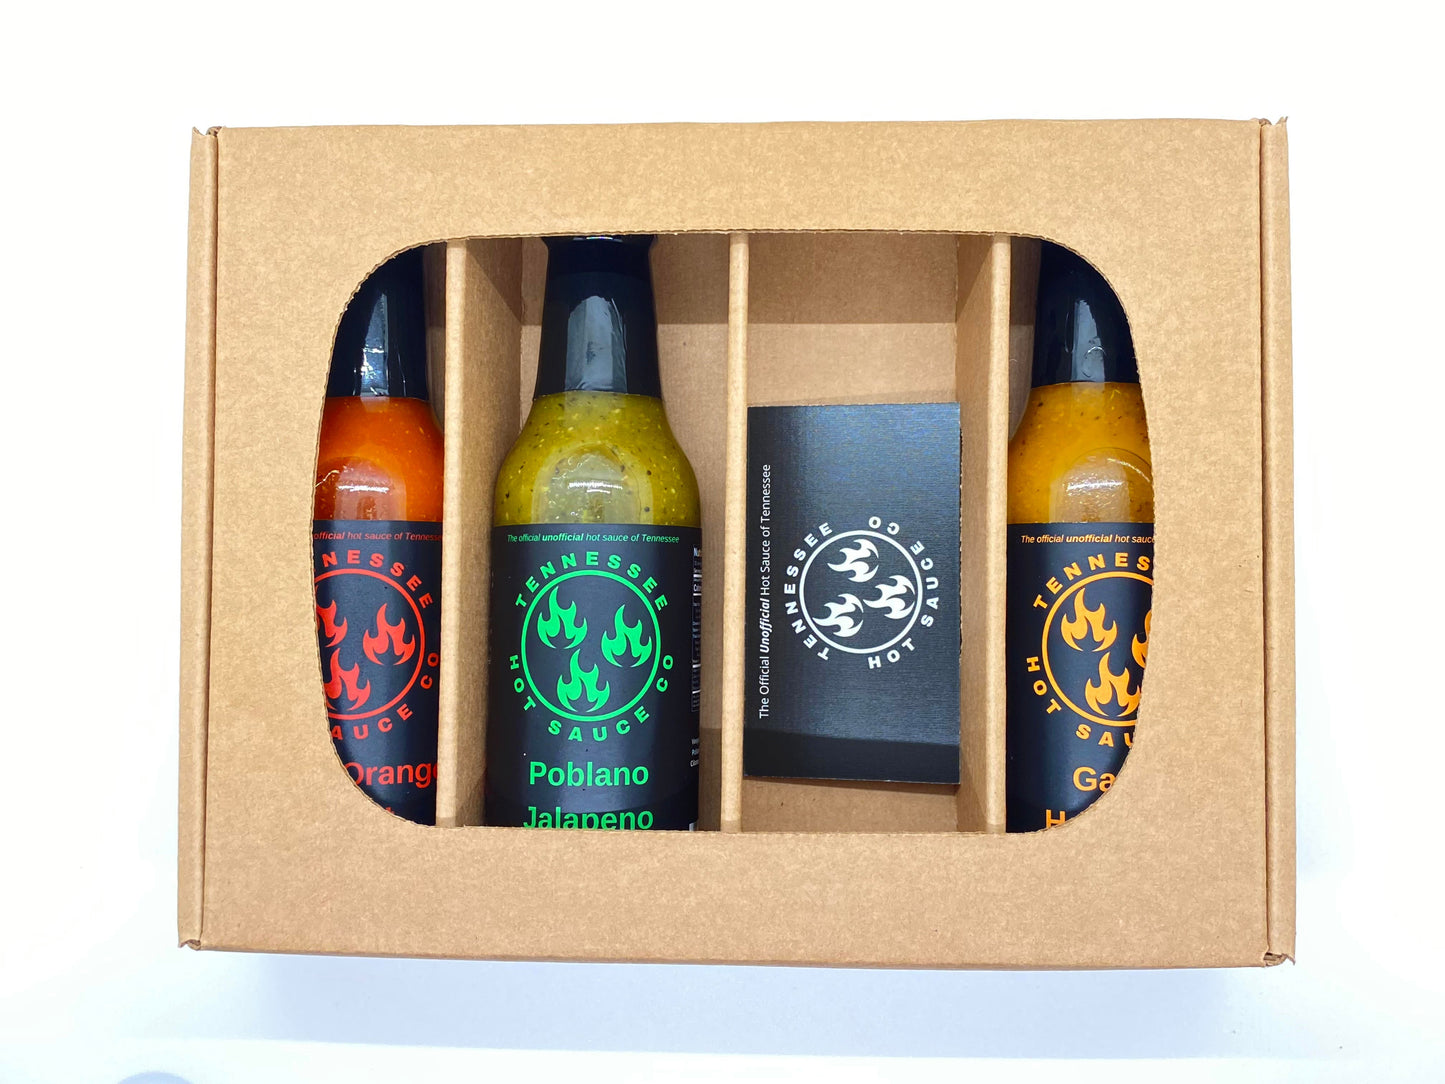 3 Bottle Hot Sauce Subscription - One Year Option